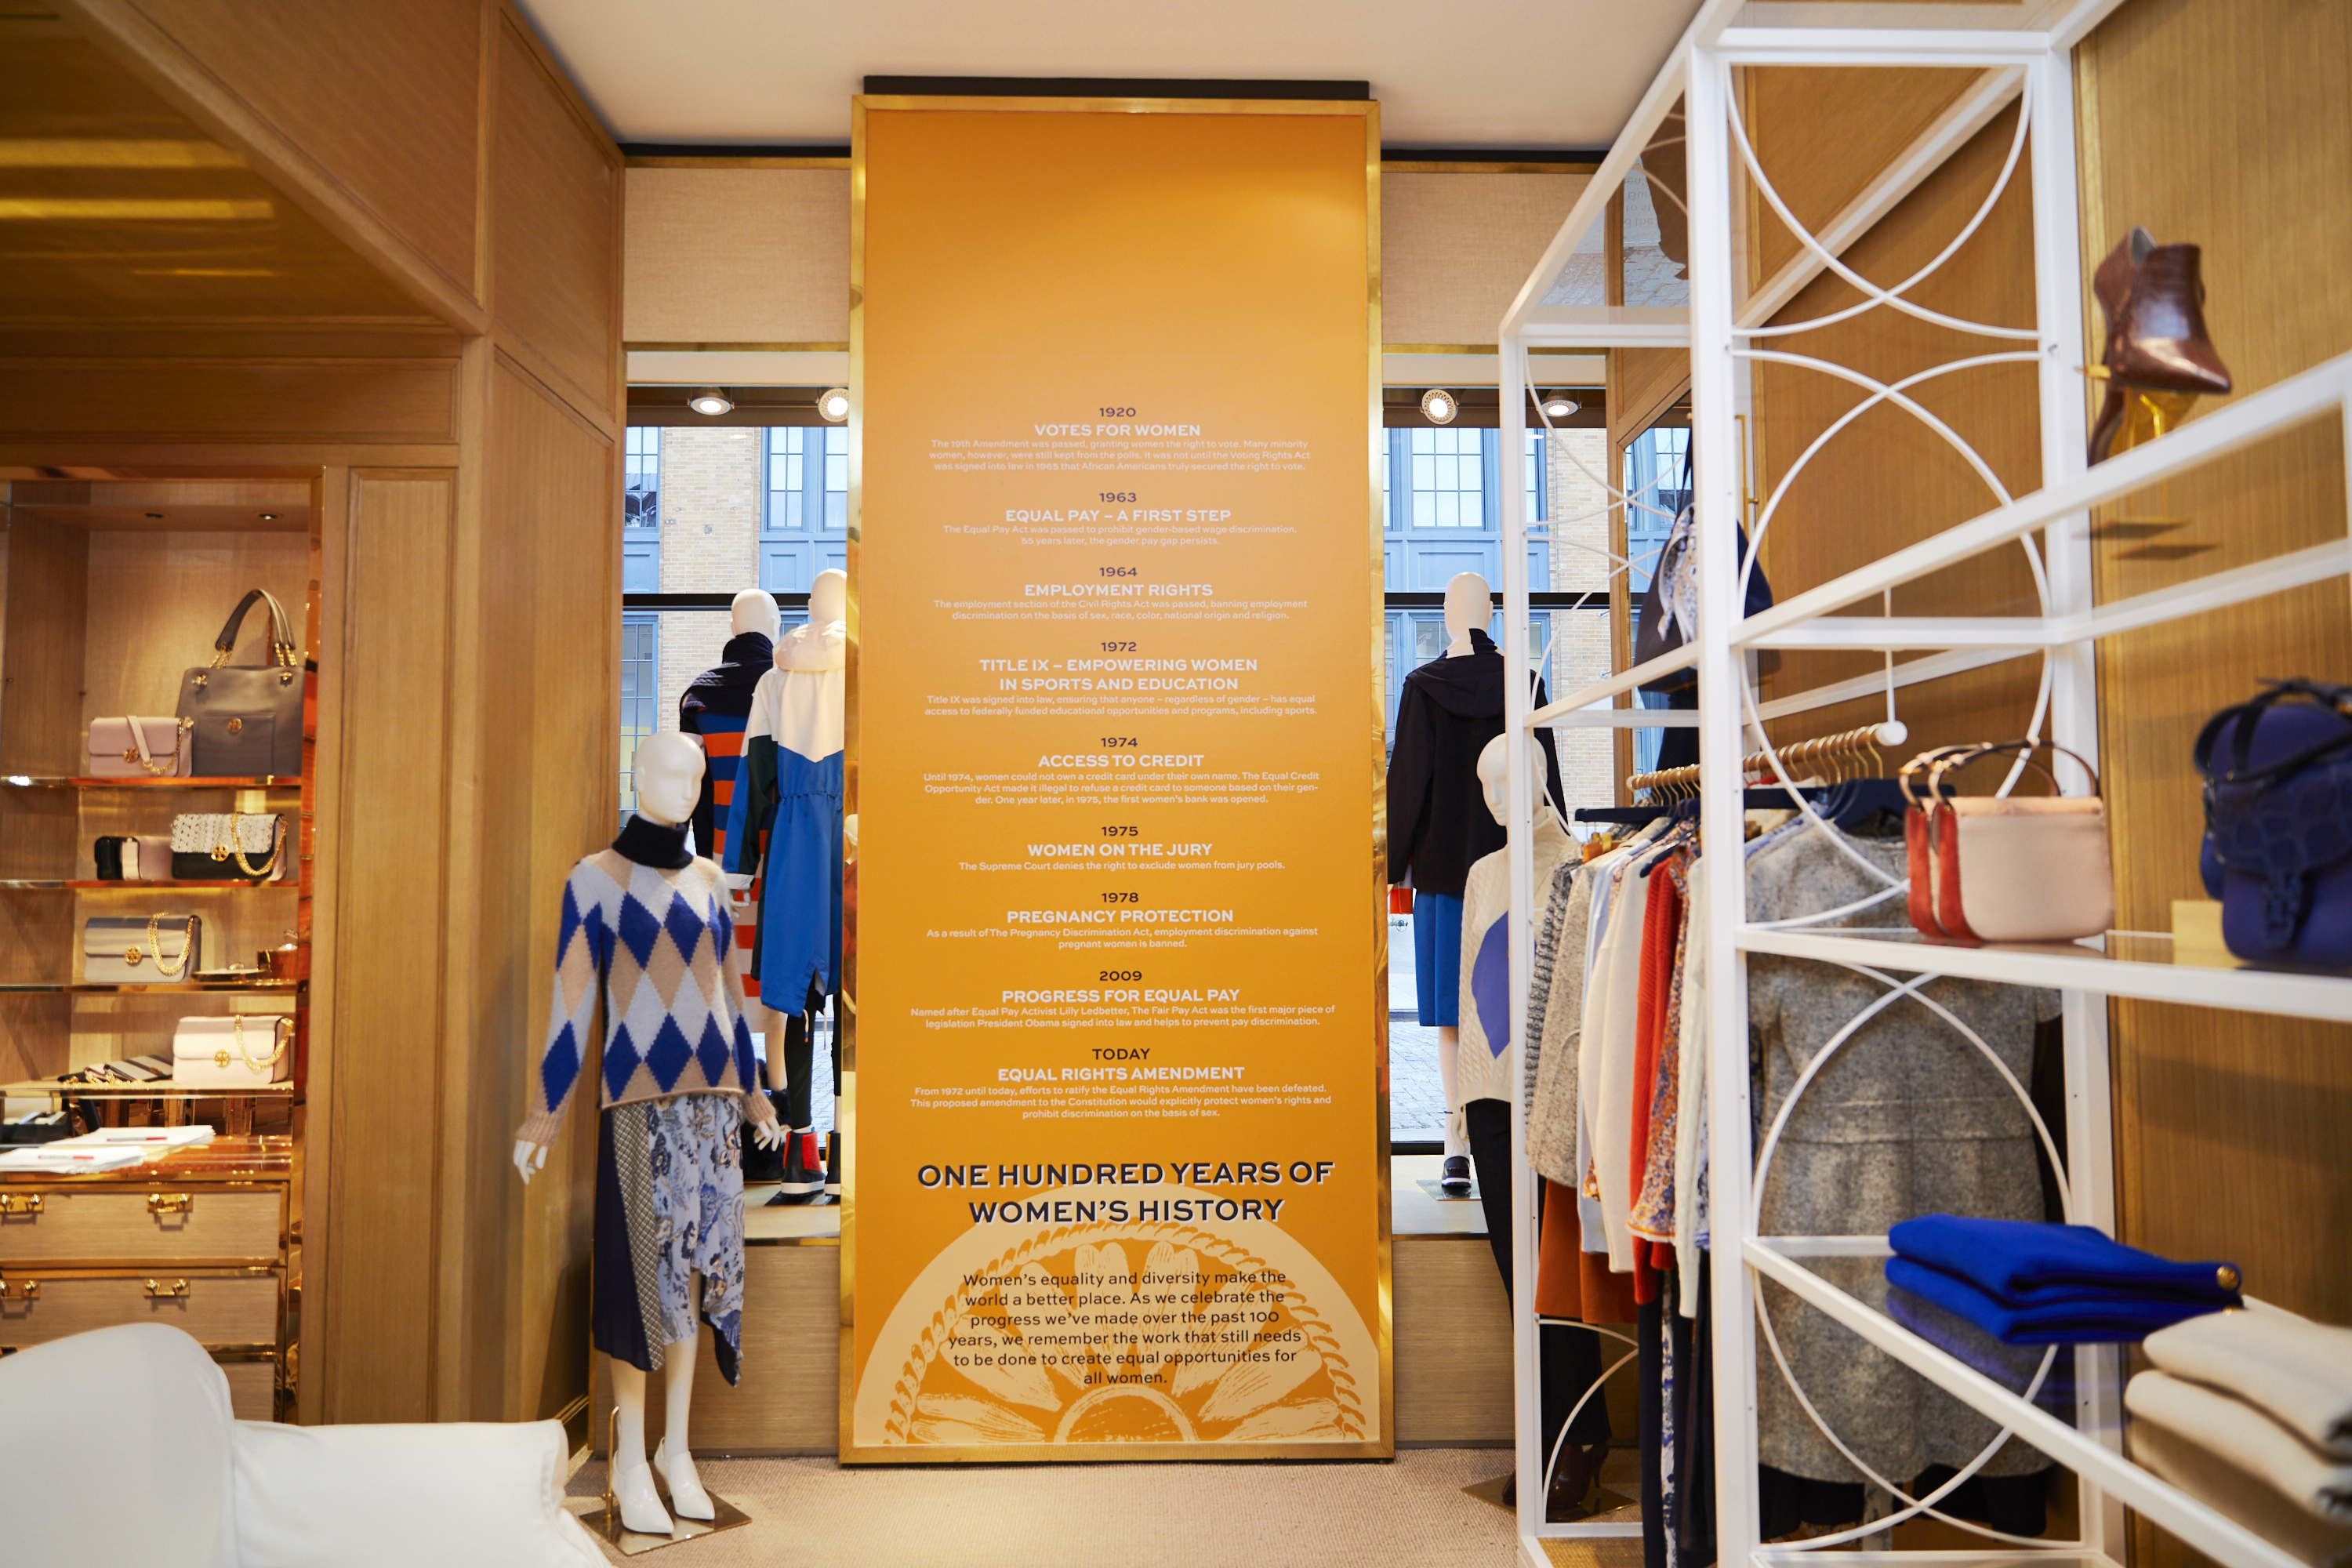 Tory Burch opens new concept store in New York